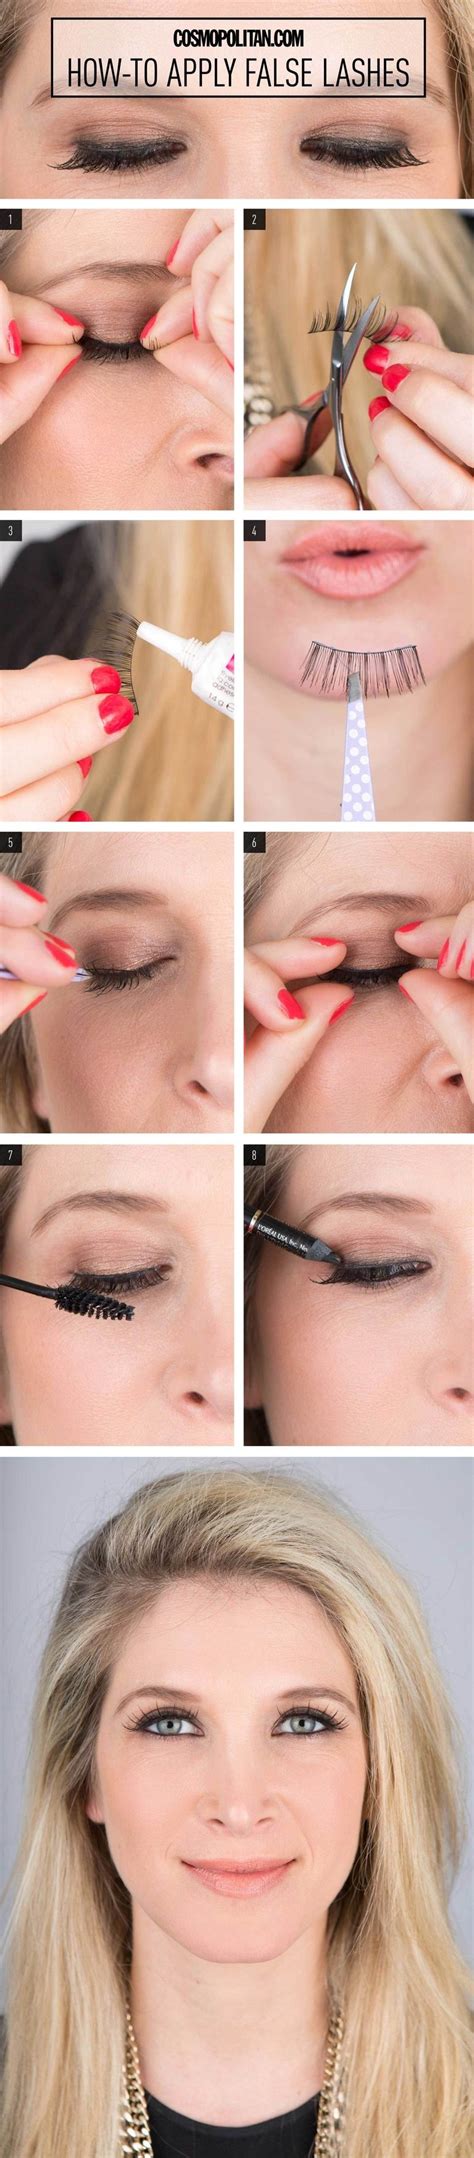 This Is the Easiest Way to Apply False Eyelashes (With images) | Applying false lashes